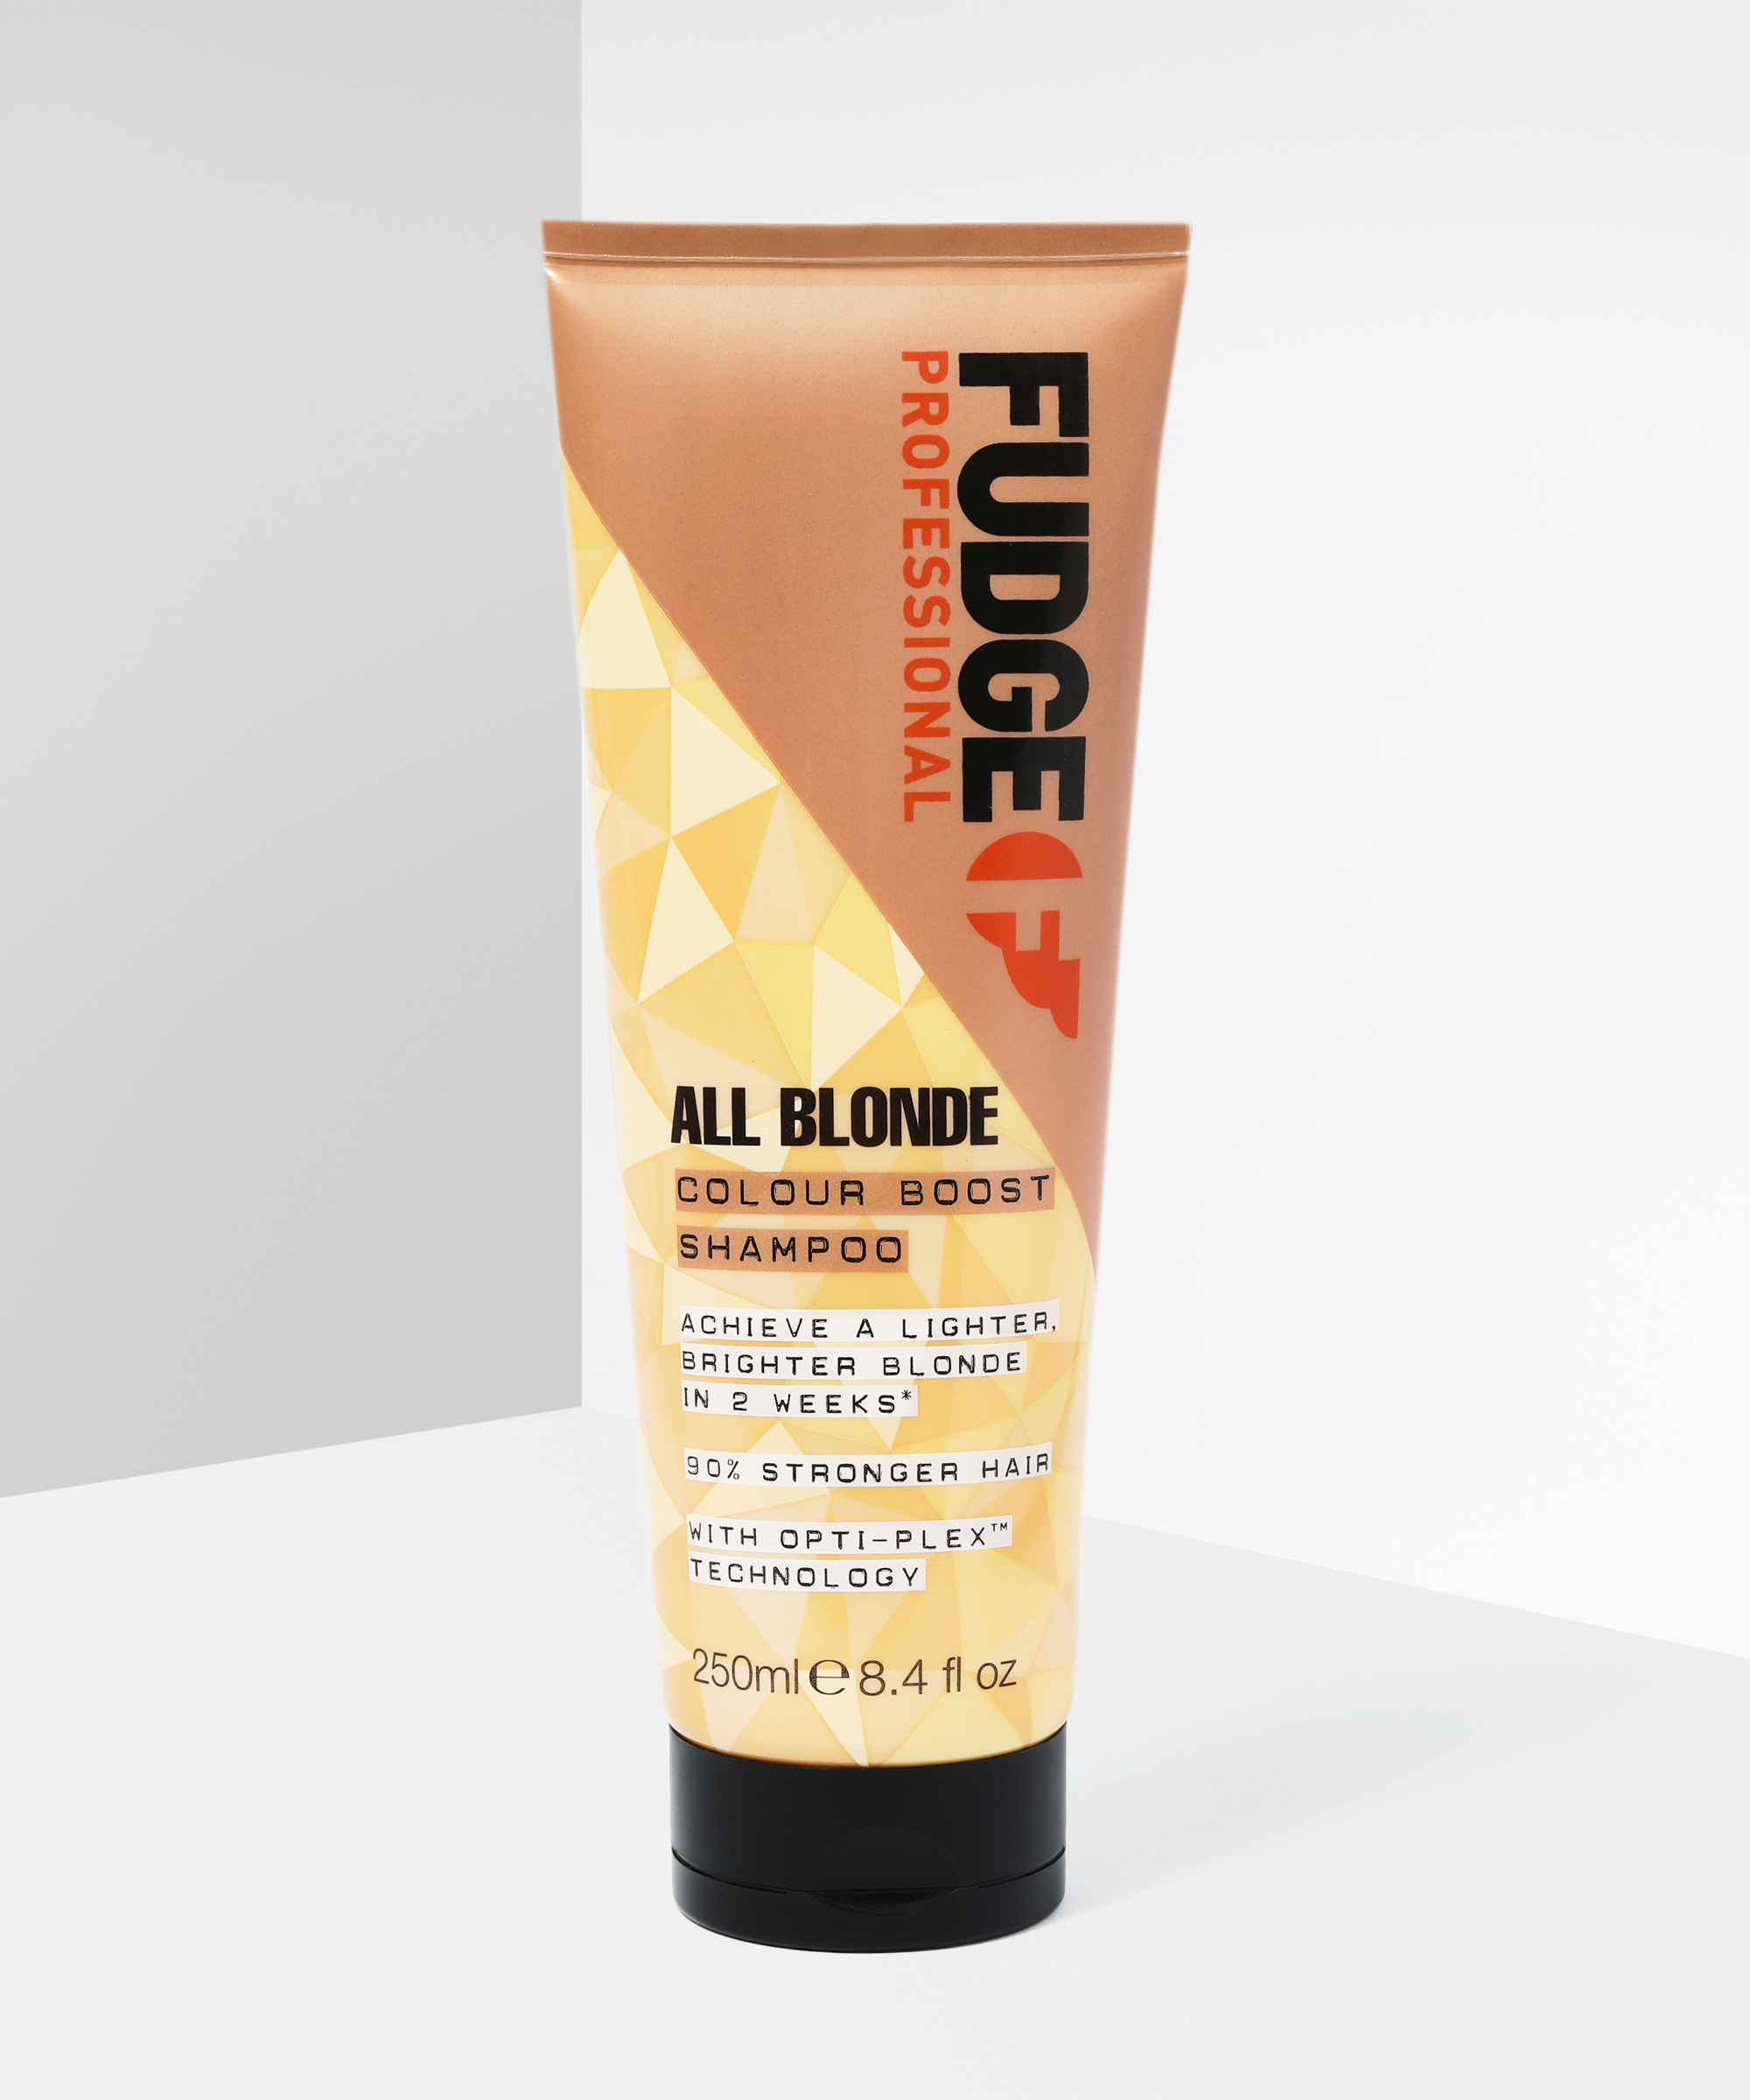 Fudge Professional All Blonde Colour Booster Shampoo at BEAUTY BAY